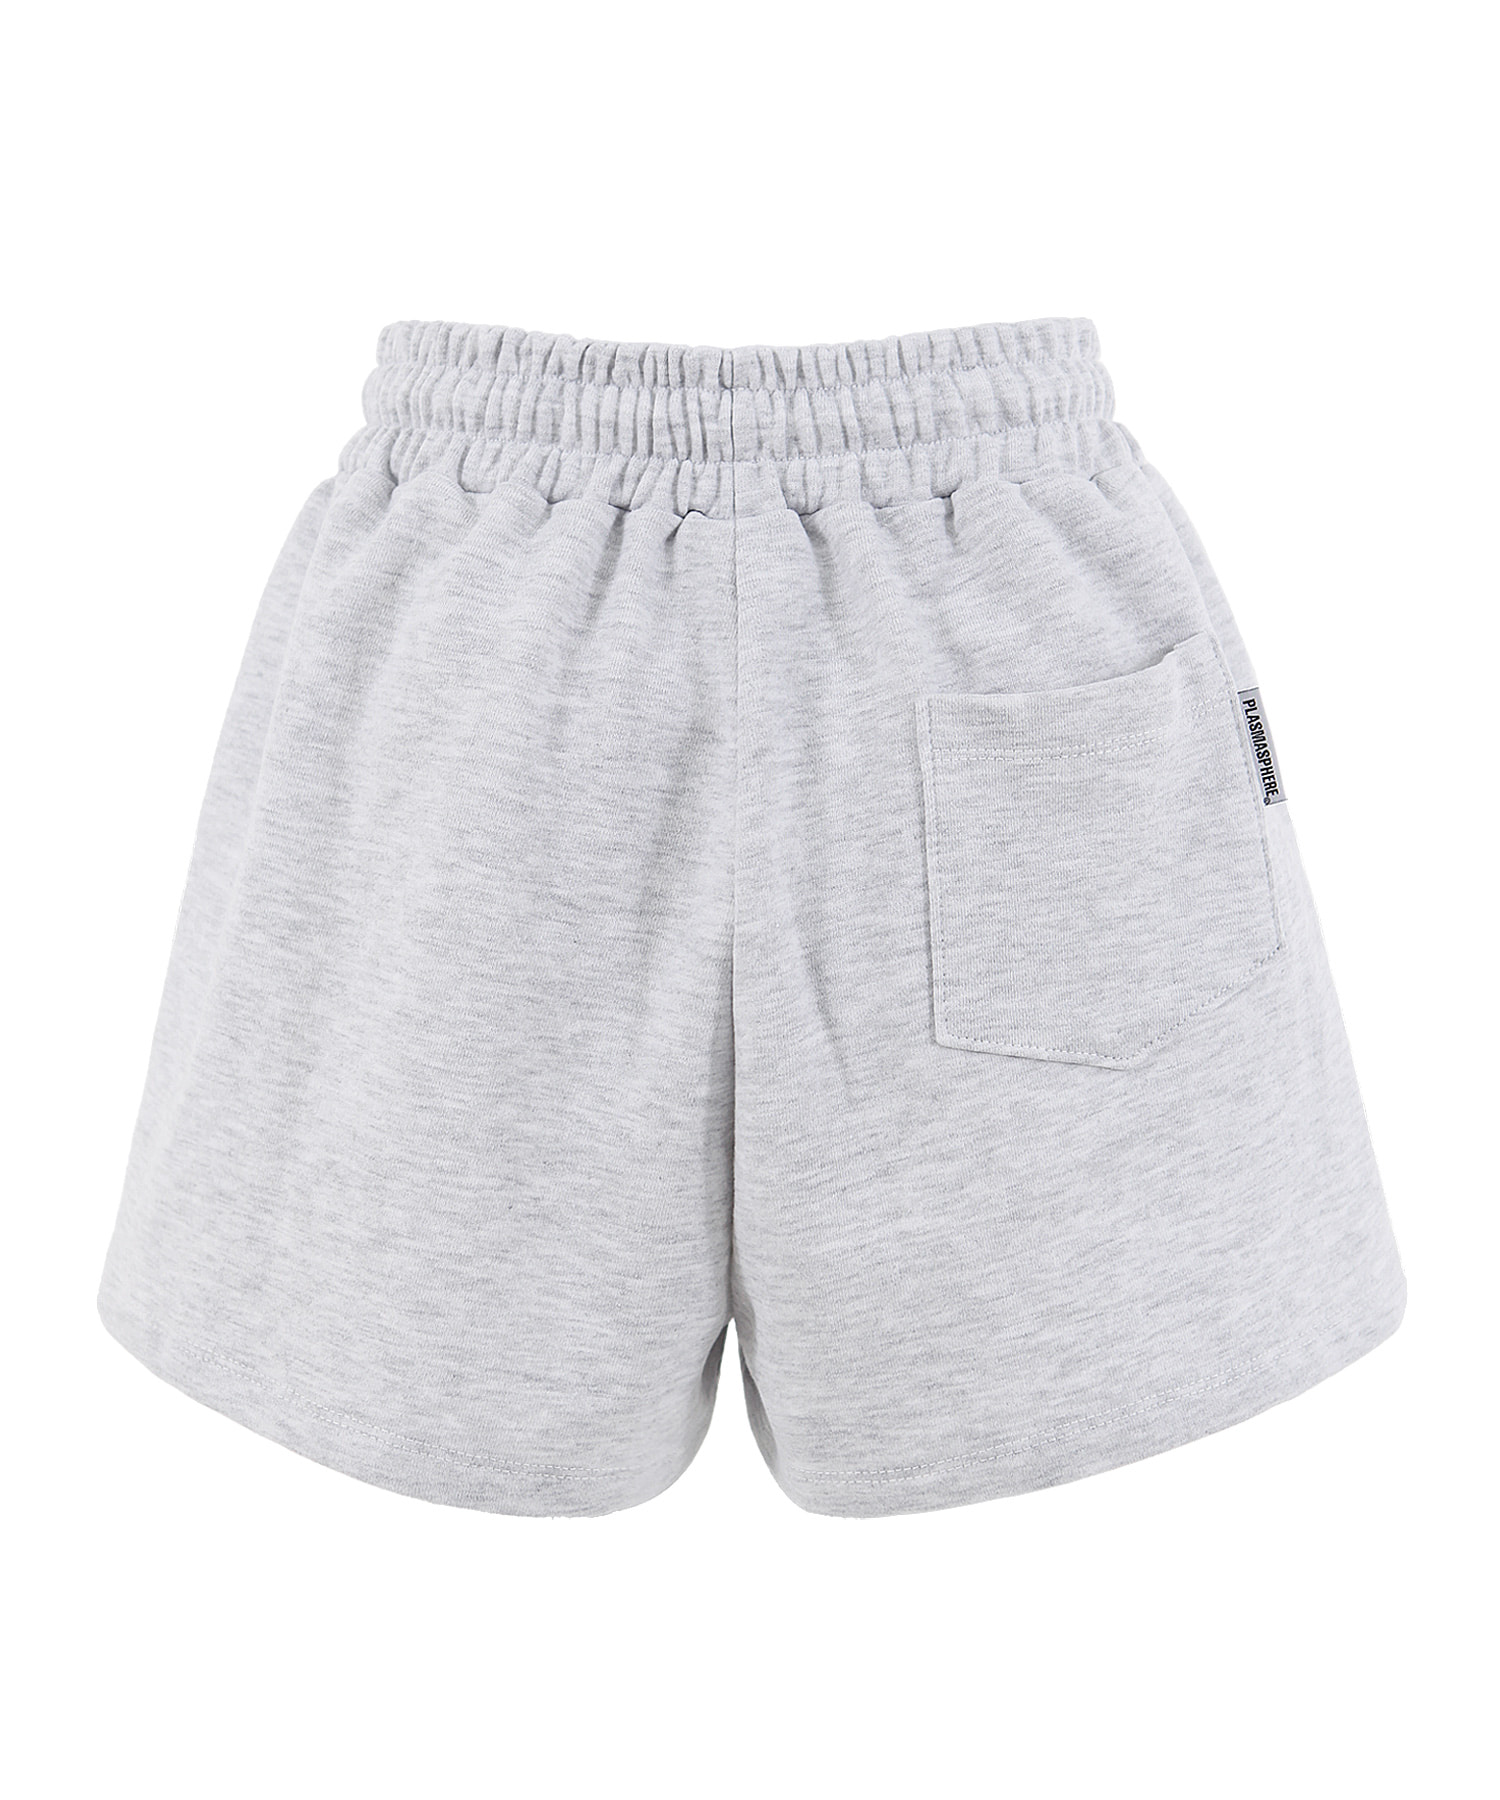 BOXER SHORTS IN GREY